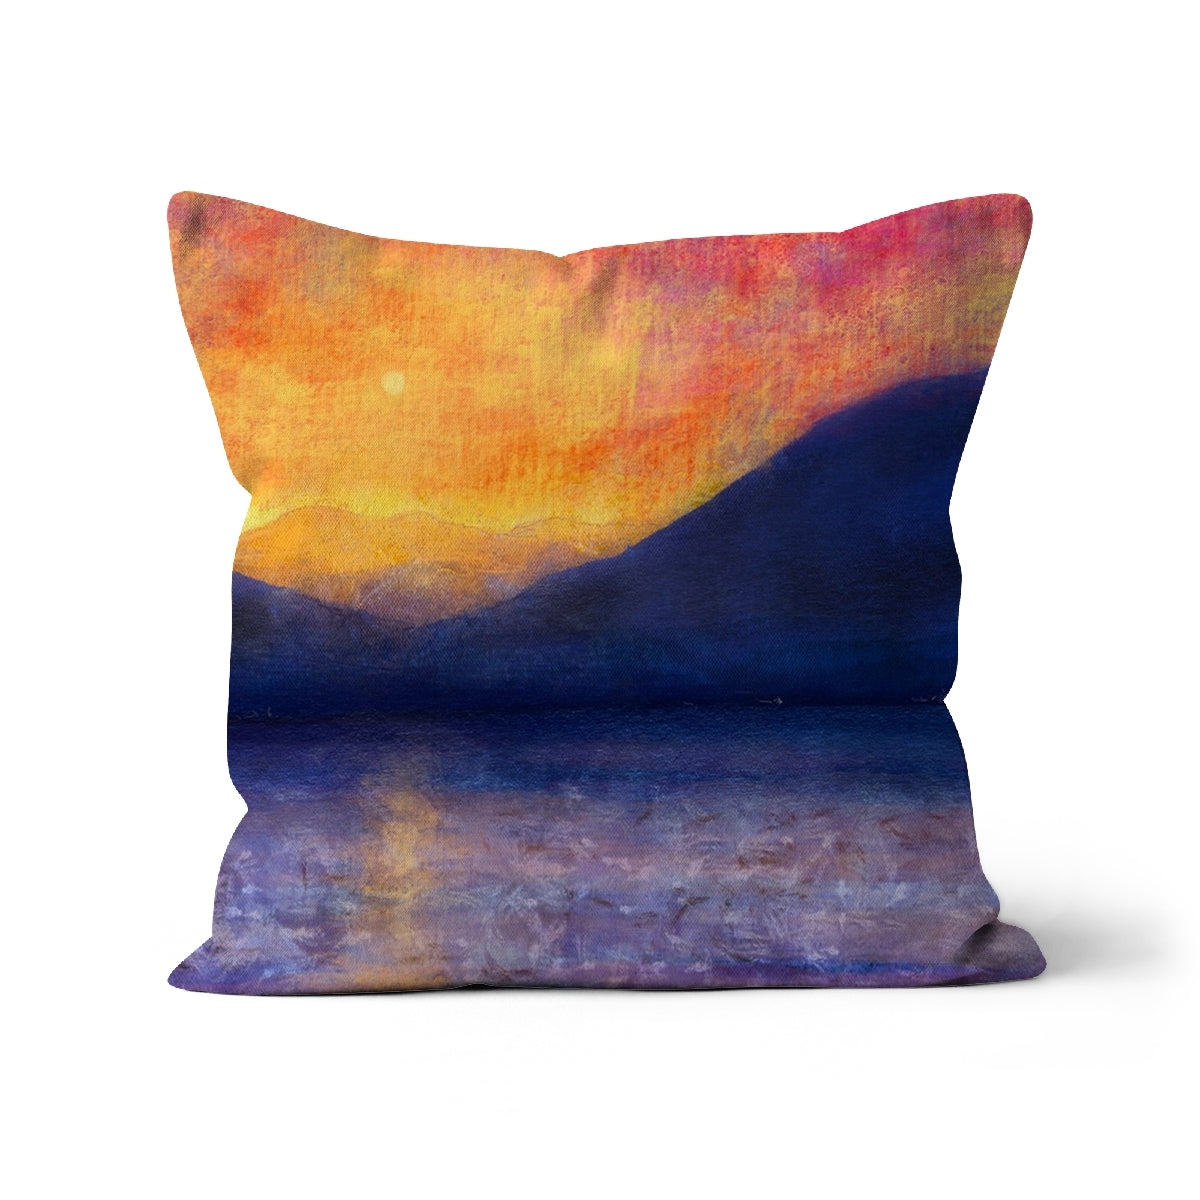 Sunset Approaching Mull Art Gifts Cushion-Cushions-Hebridean Islands Art Gallery-Linen-24"x24"-Paintings, Prints, Homeware, Art Gifts From Scotland By Scottish Artist Kevin Hunter